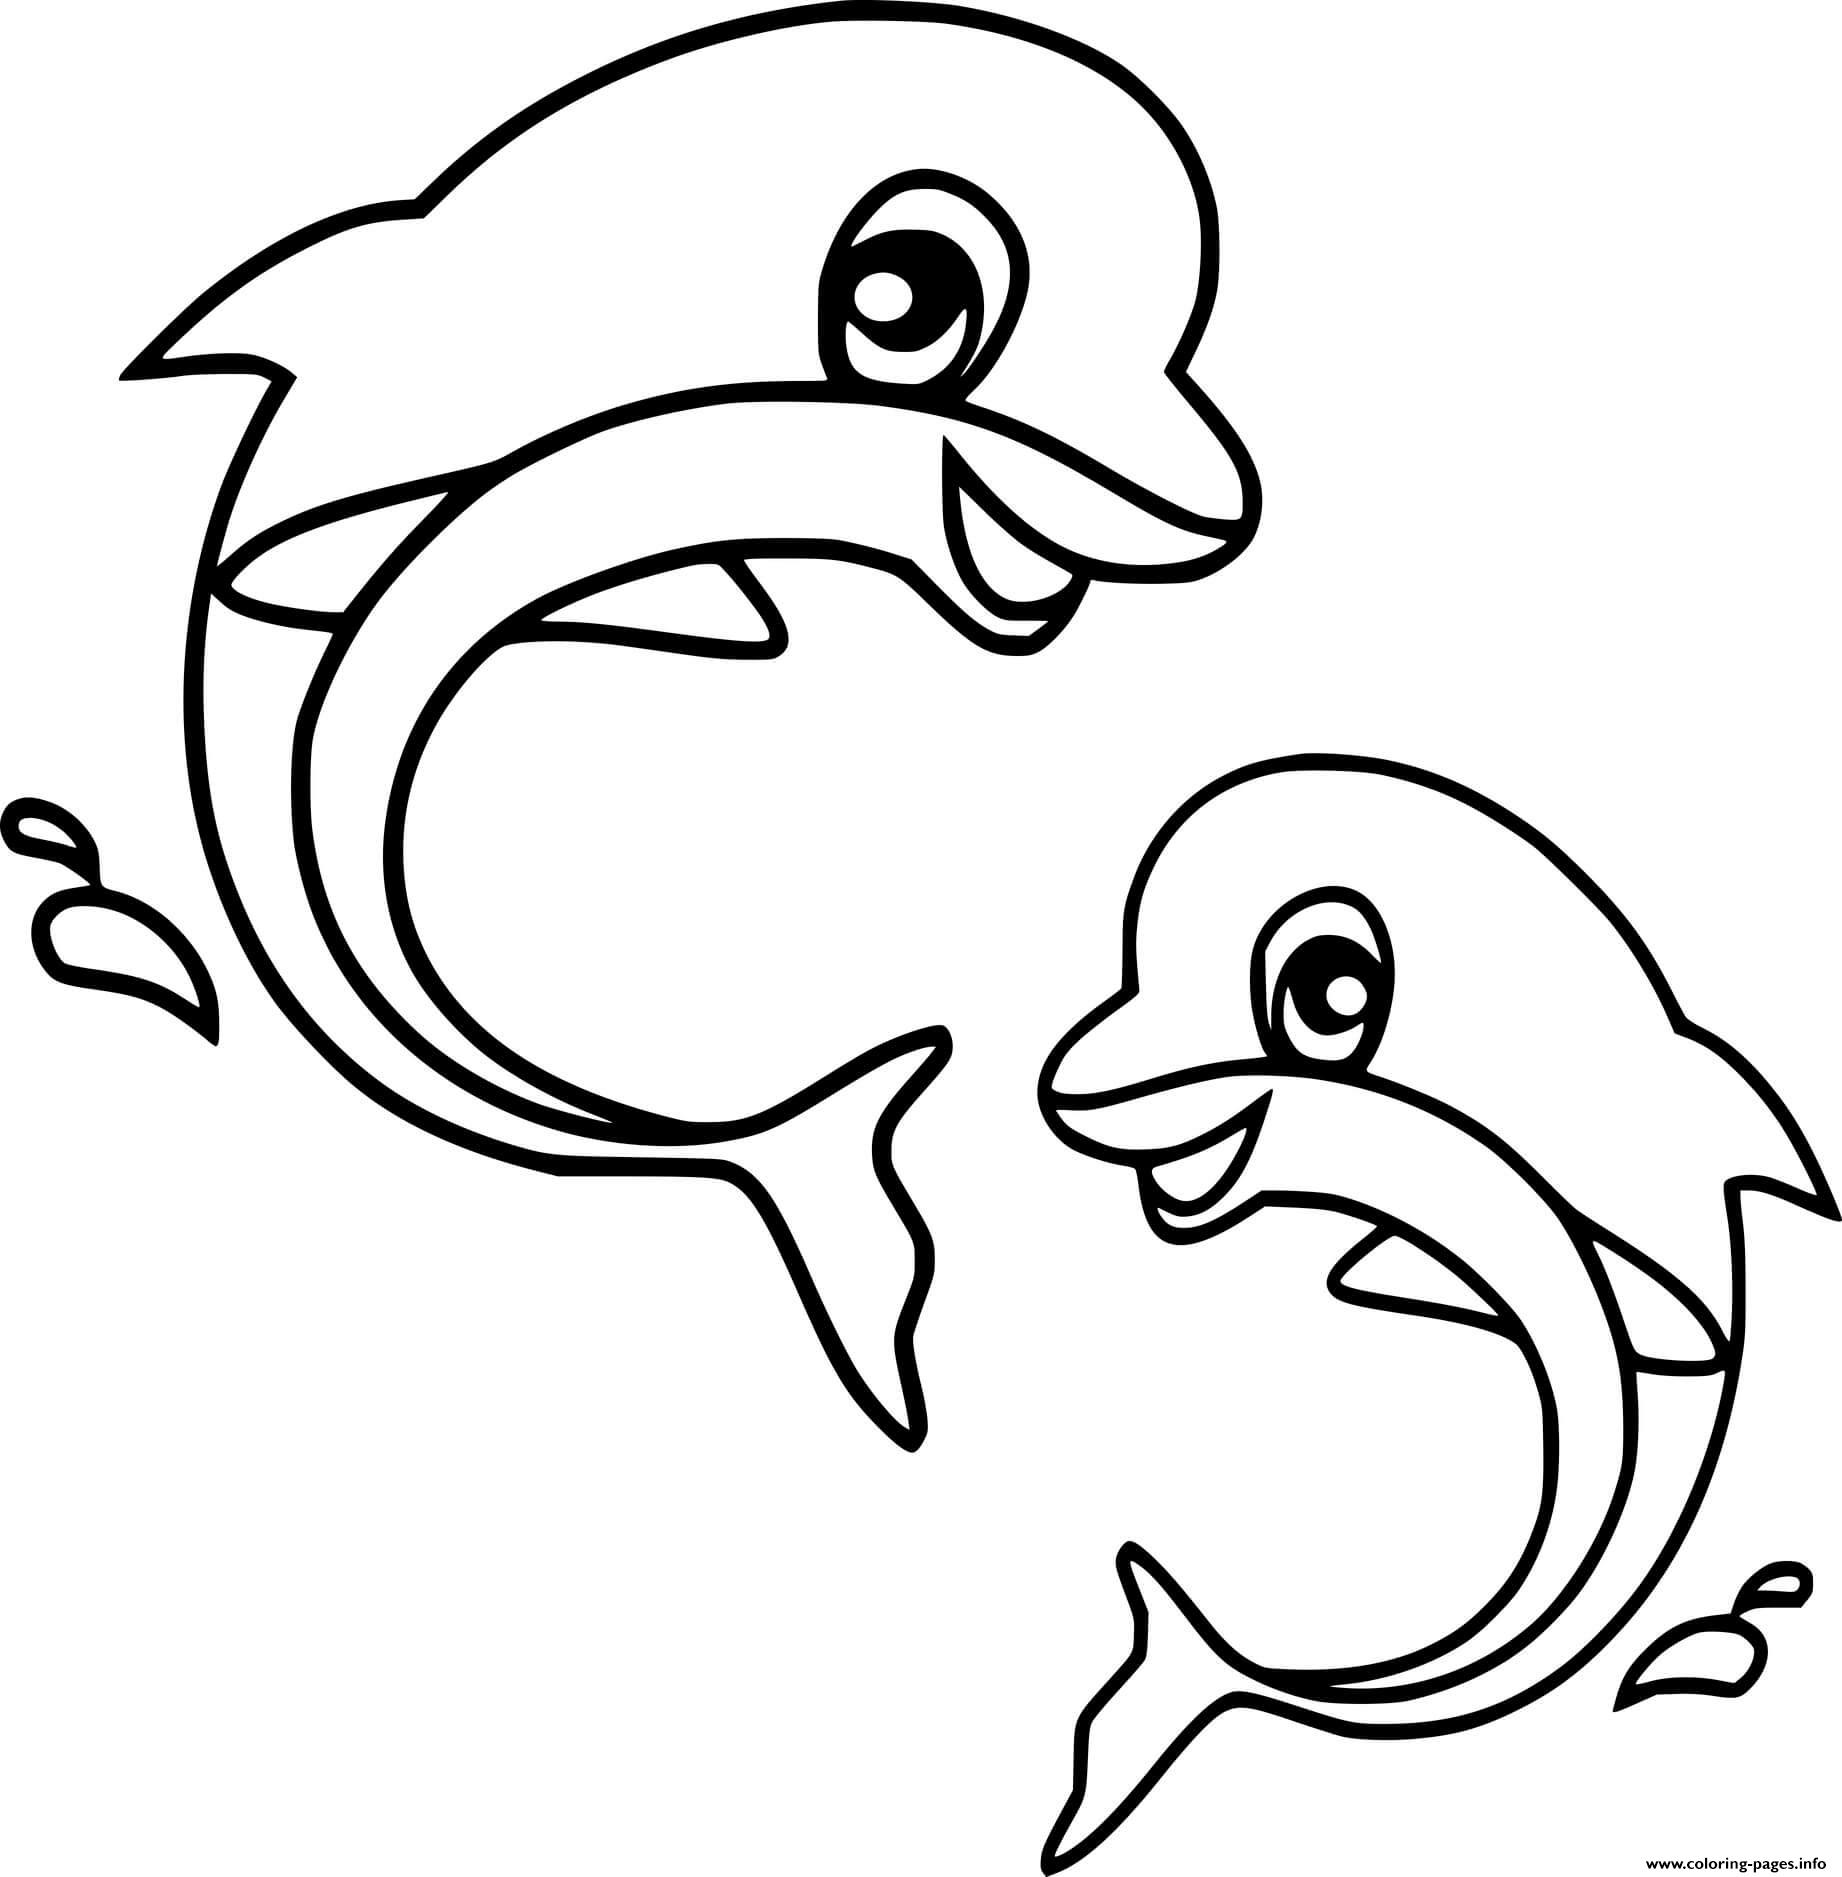 Coloring Pages Of Sea Animals Printable - Coloring